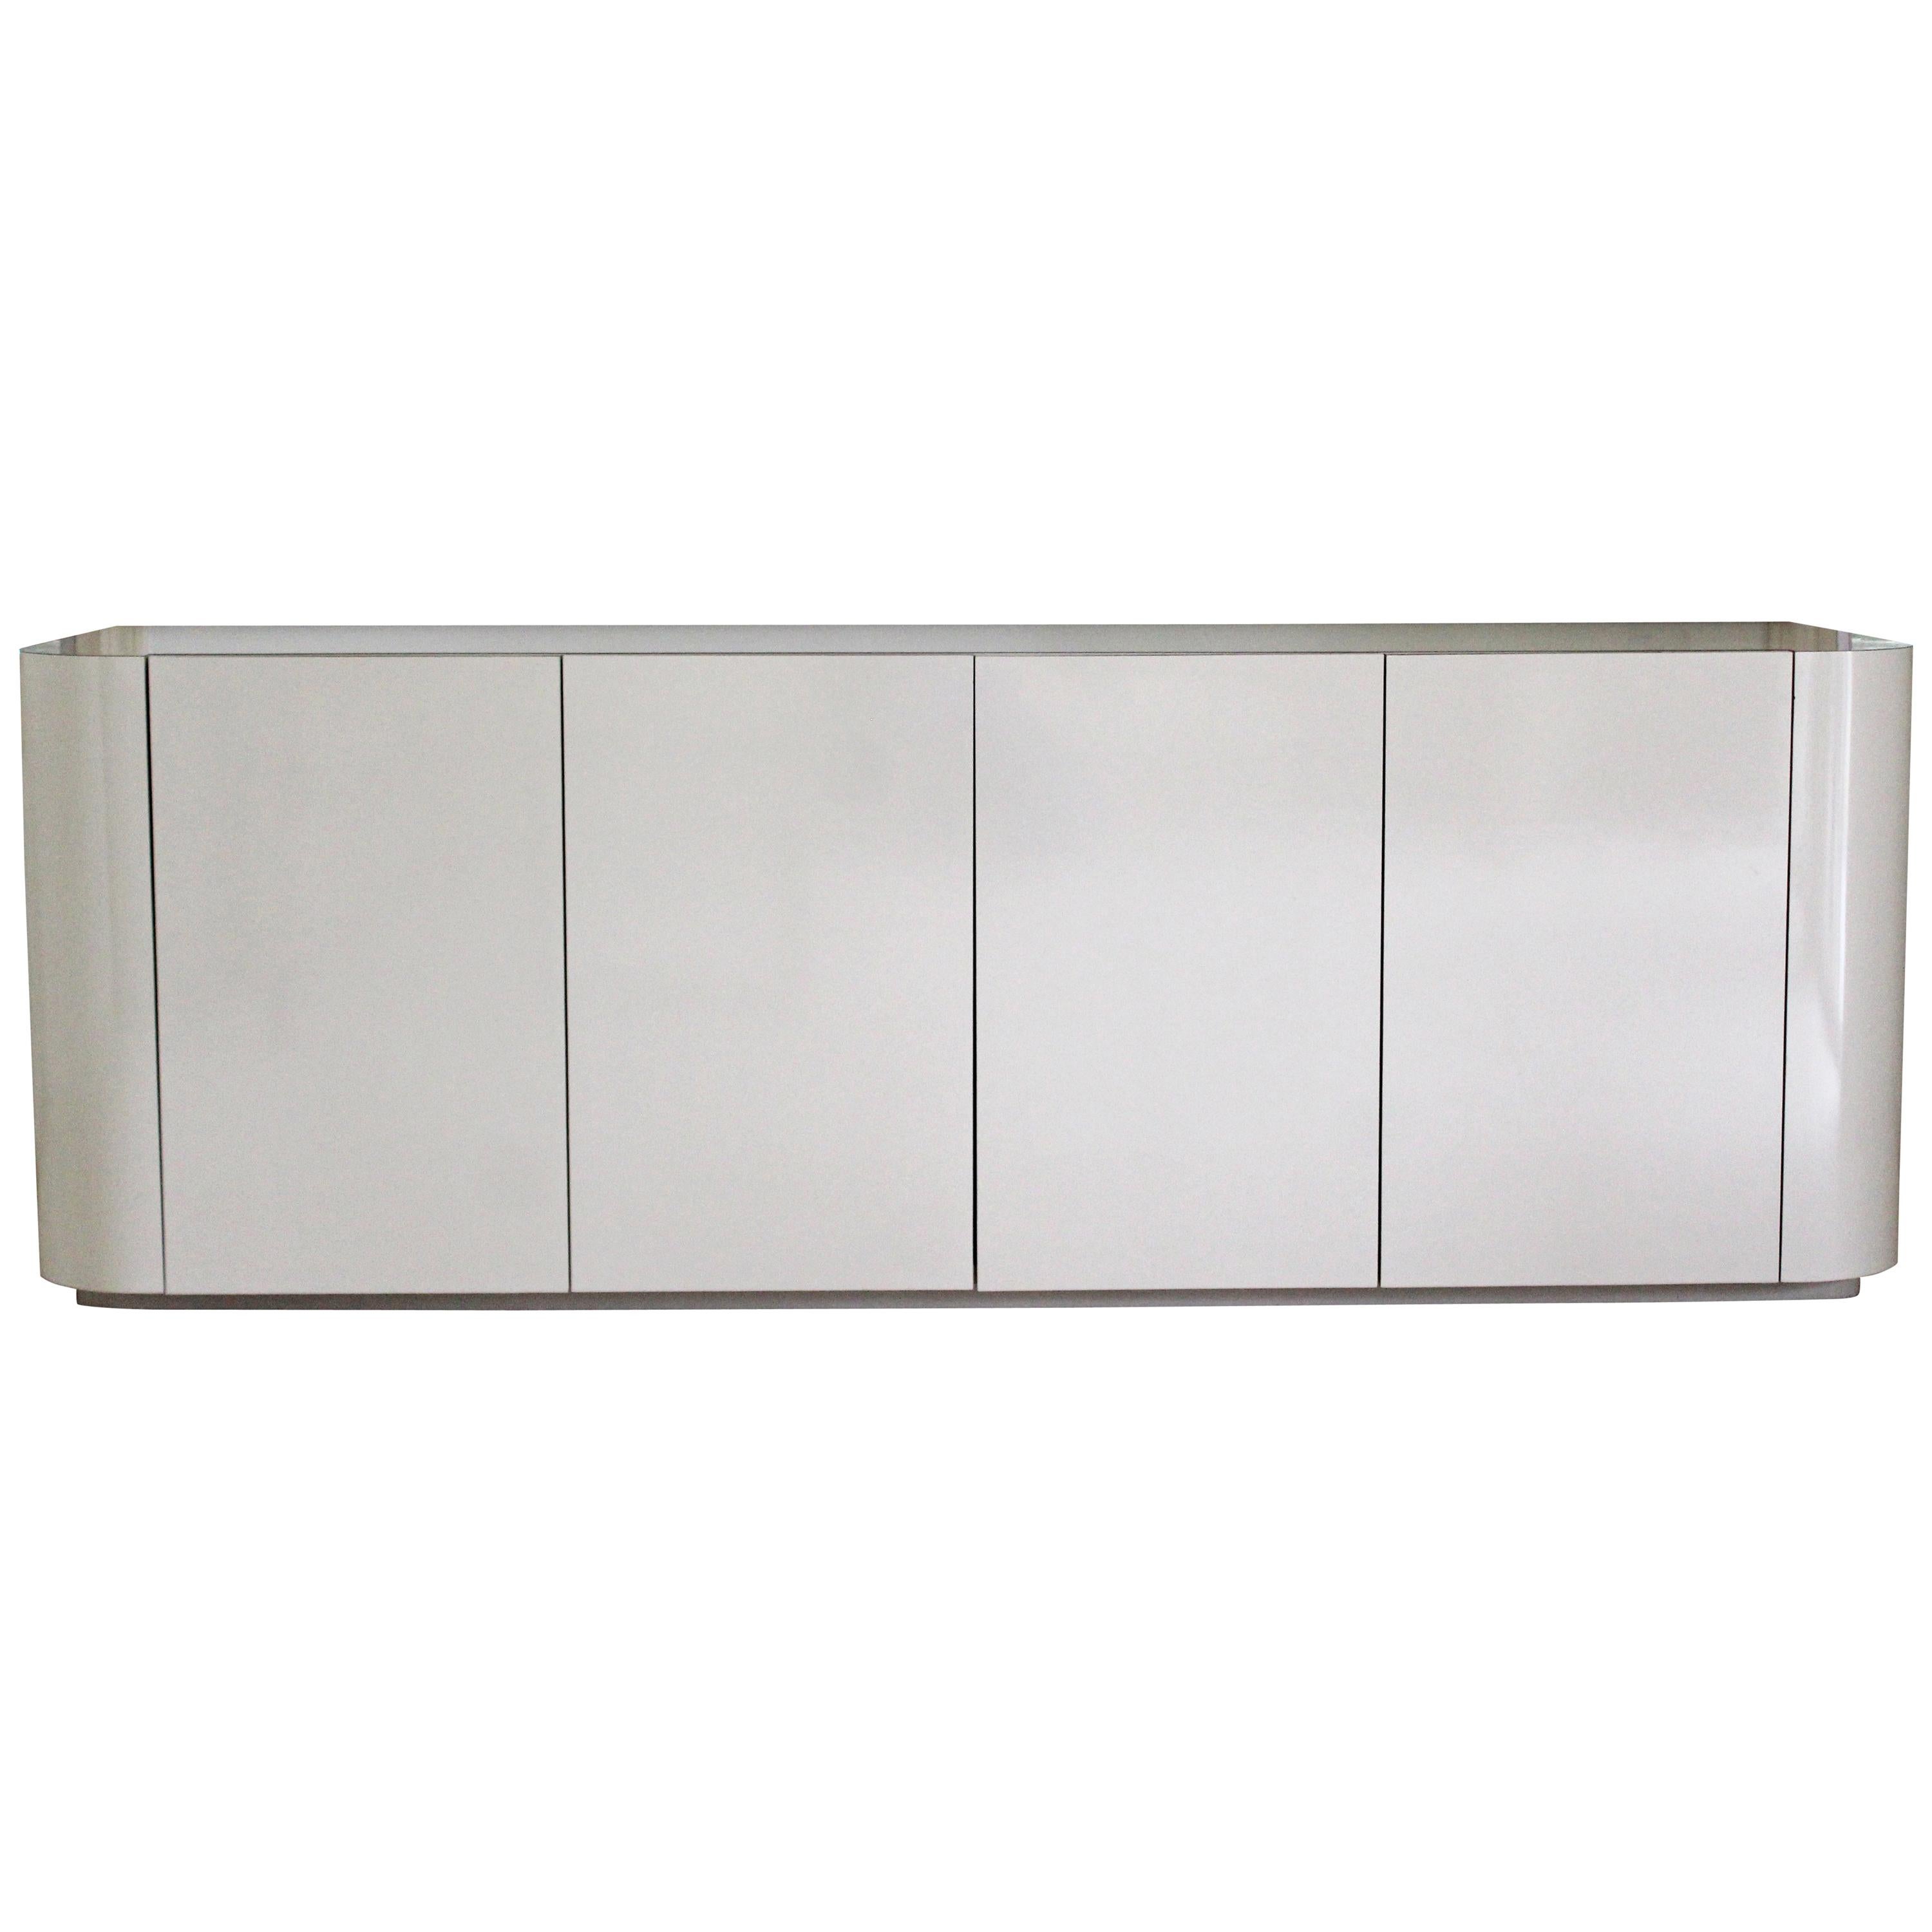 Contemporary Modern 4-Door Glossy White Lacquer Credenza Cabinet, 1980s